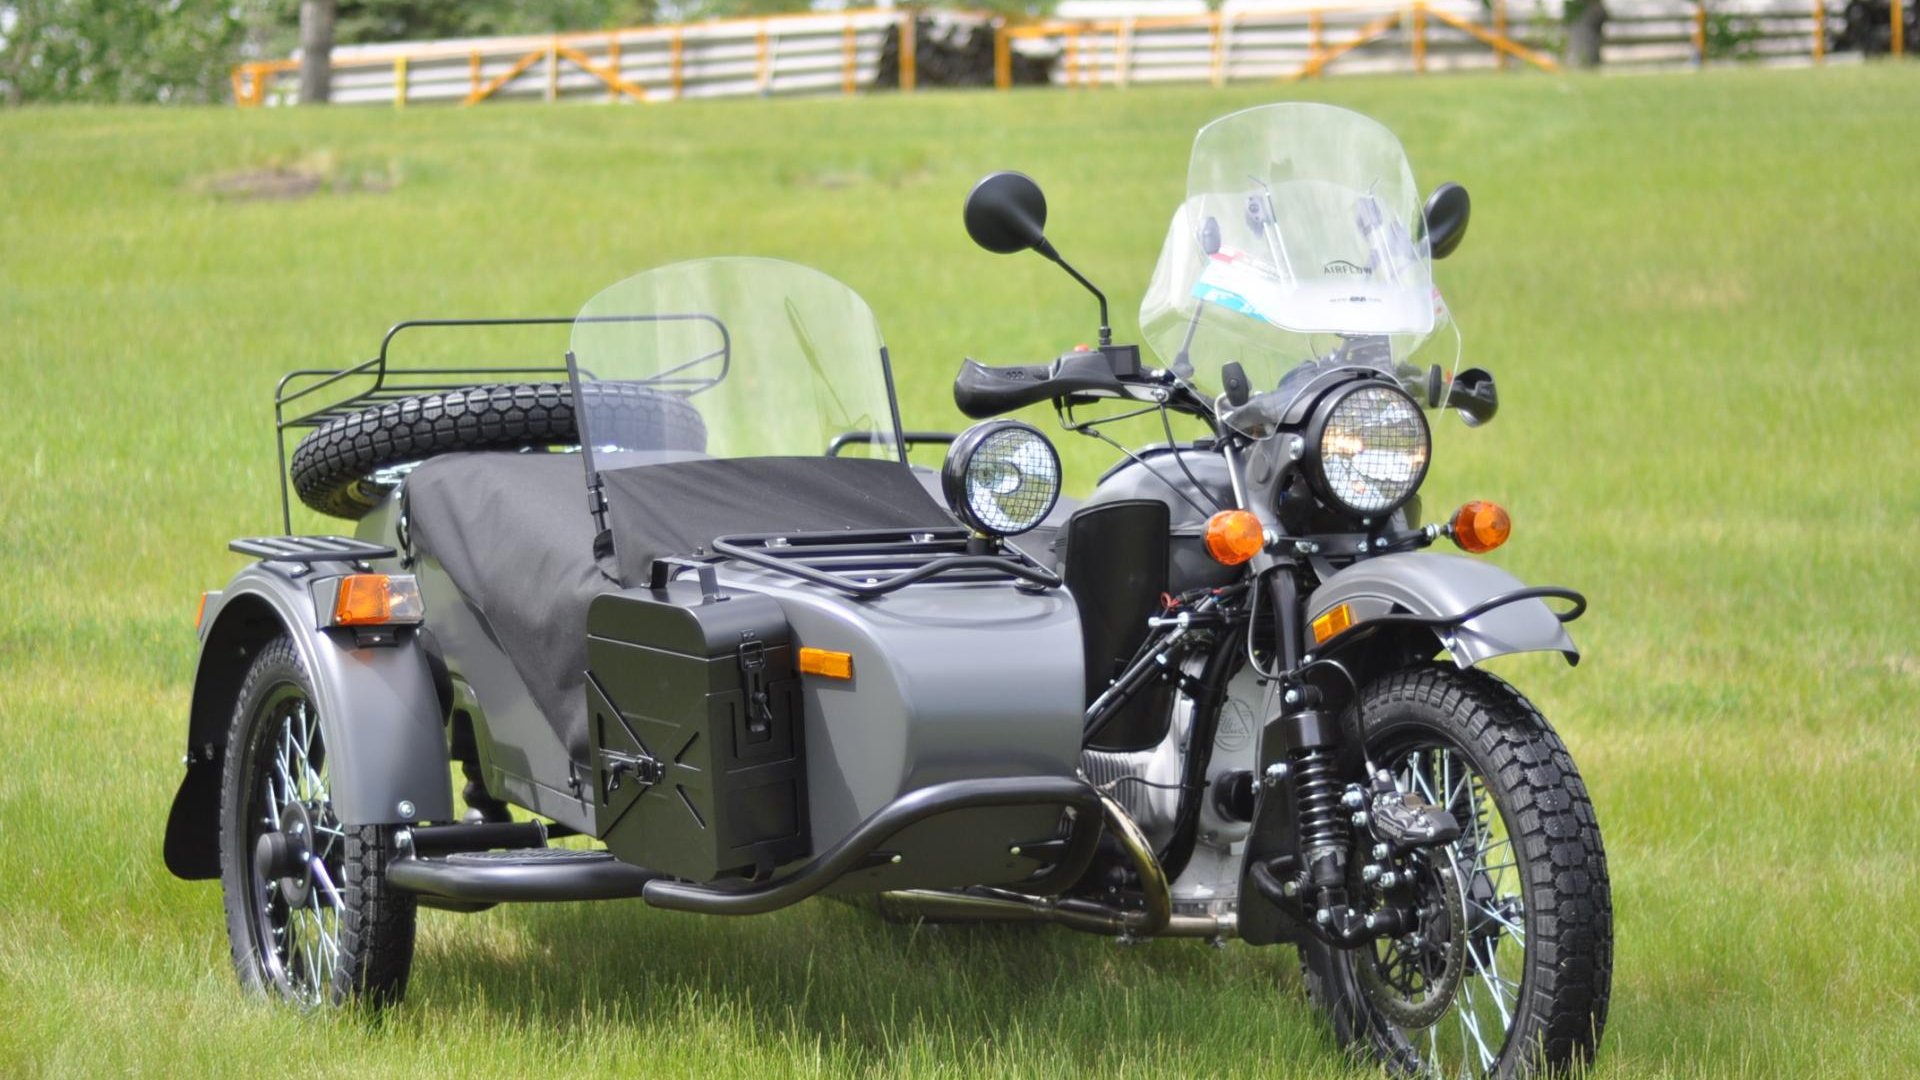 Black and Silver Cruiser Motorcycle on Green Grass Field During Daytime. Wallpaper in 1920x1080 Resolution